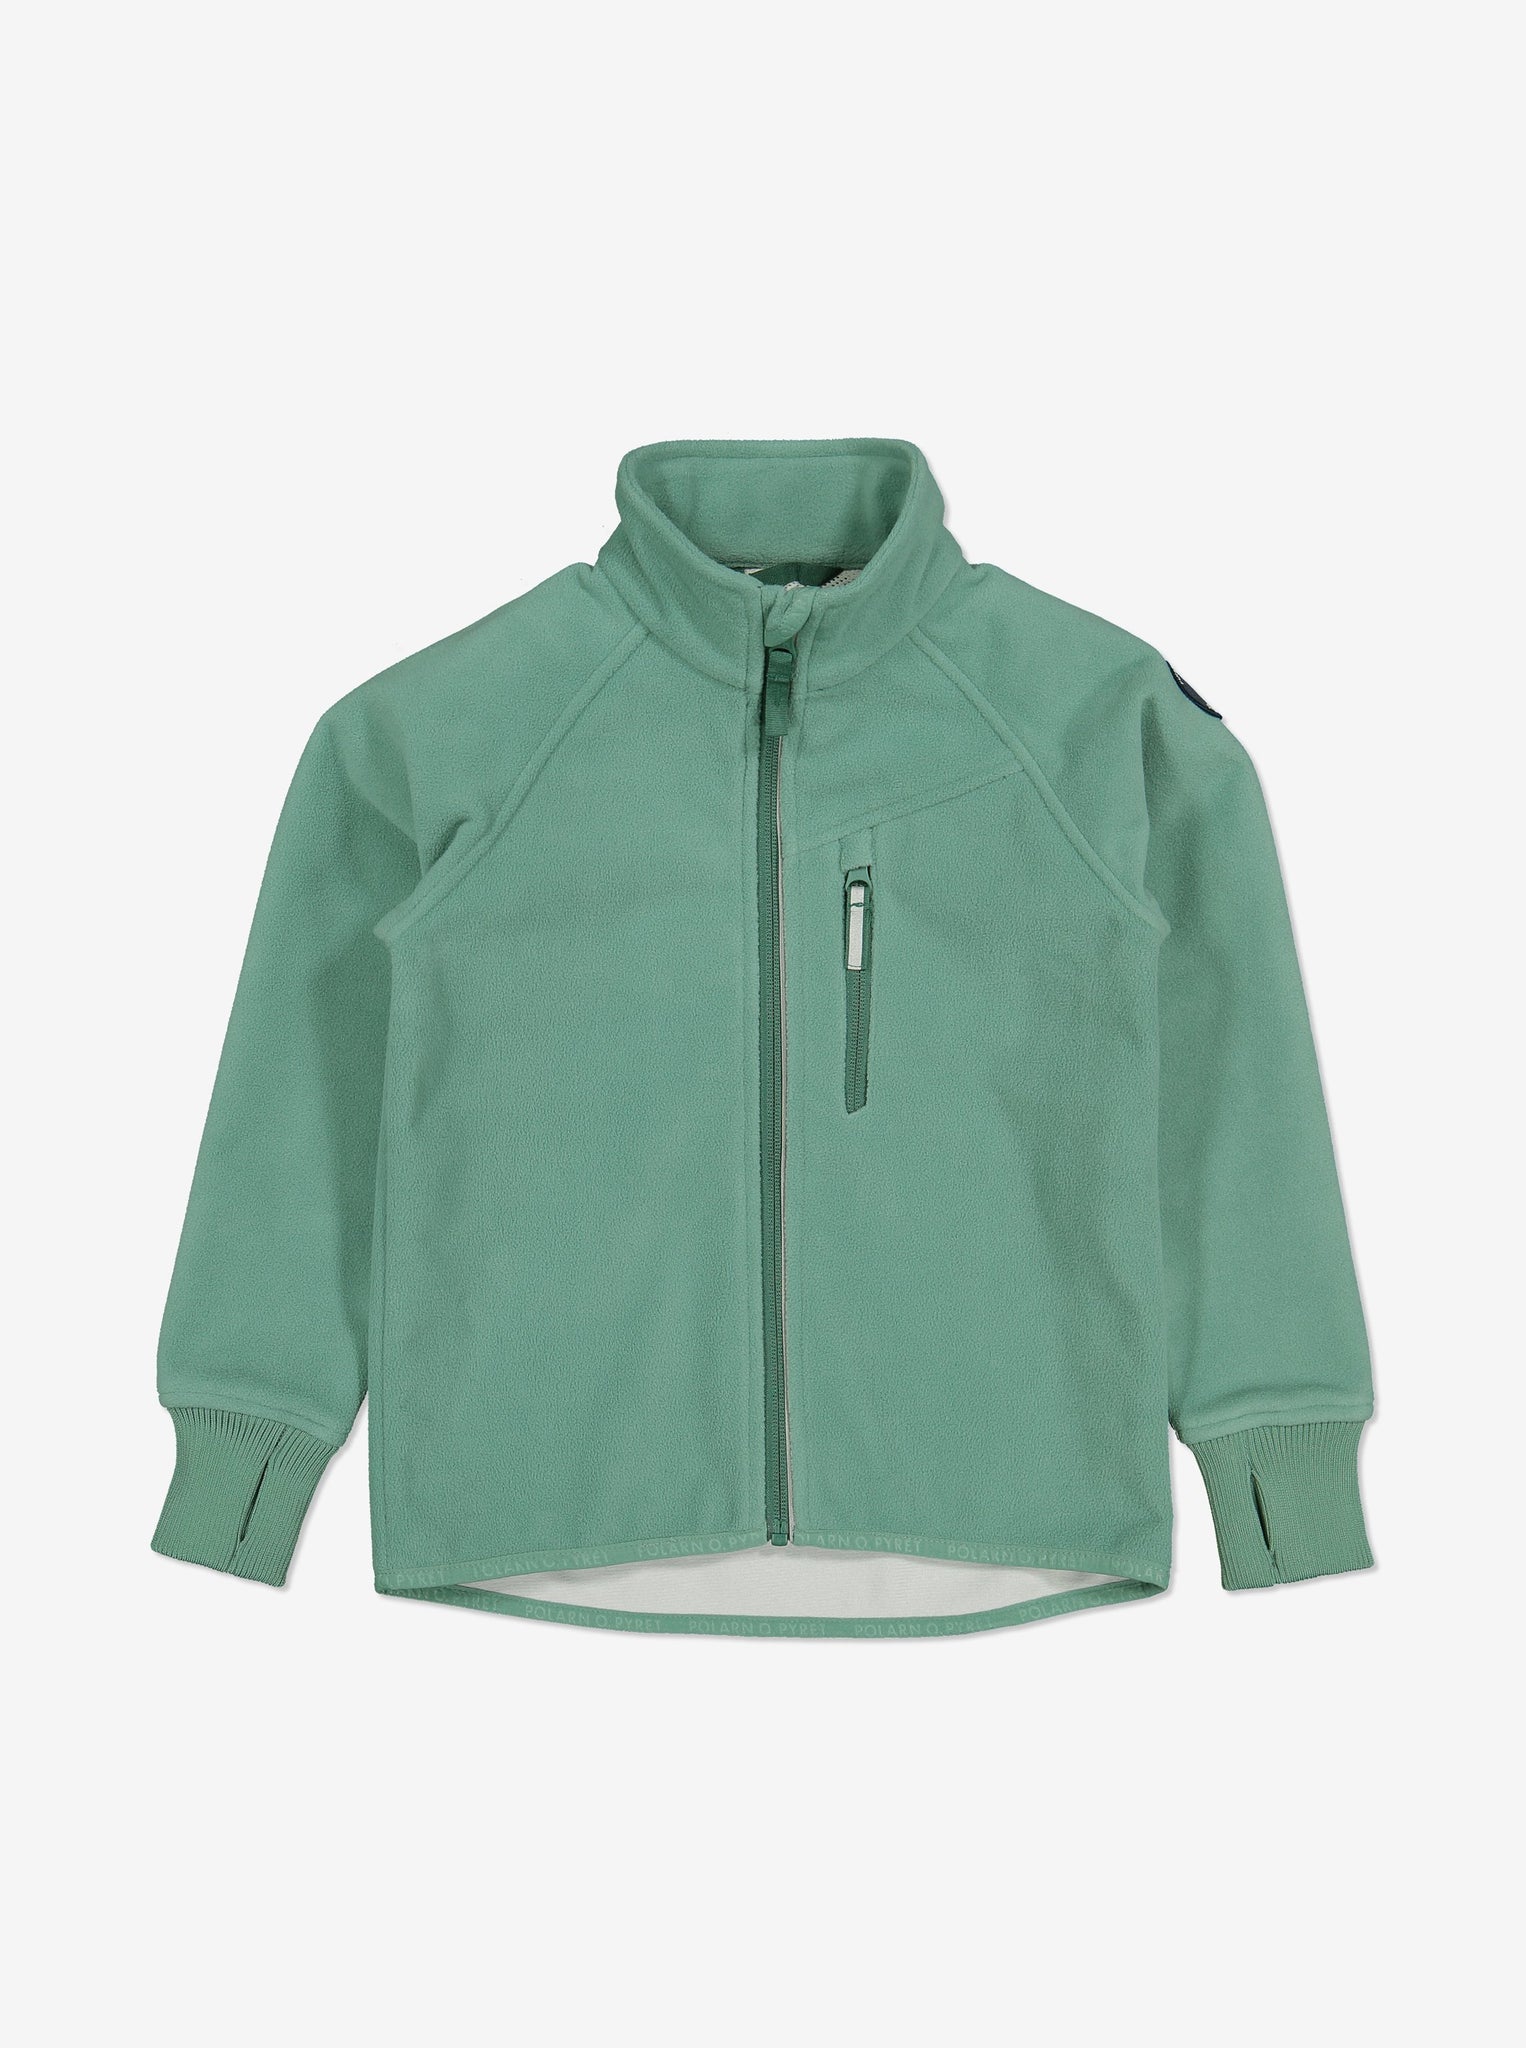 Green, kids waterproof fleece jacket, with reflectors on zips and cuff thumbholes, made of breathable and warm fabric.